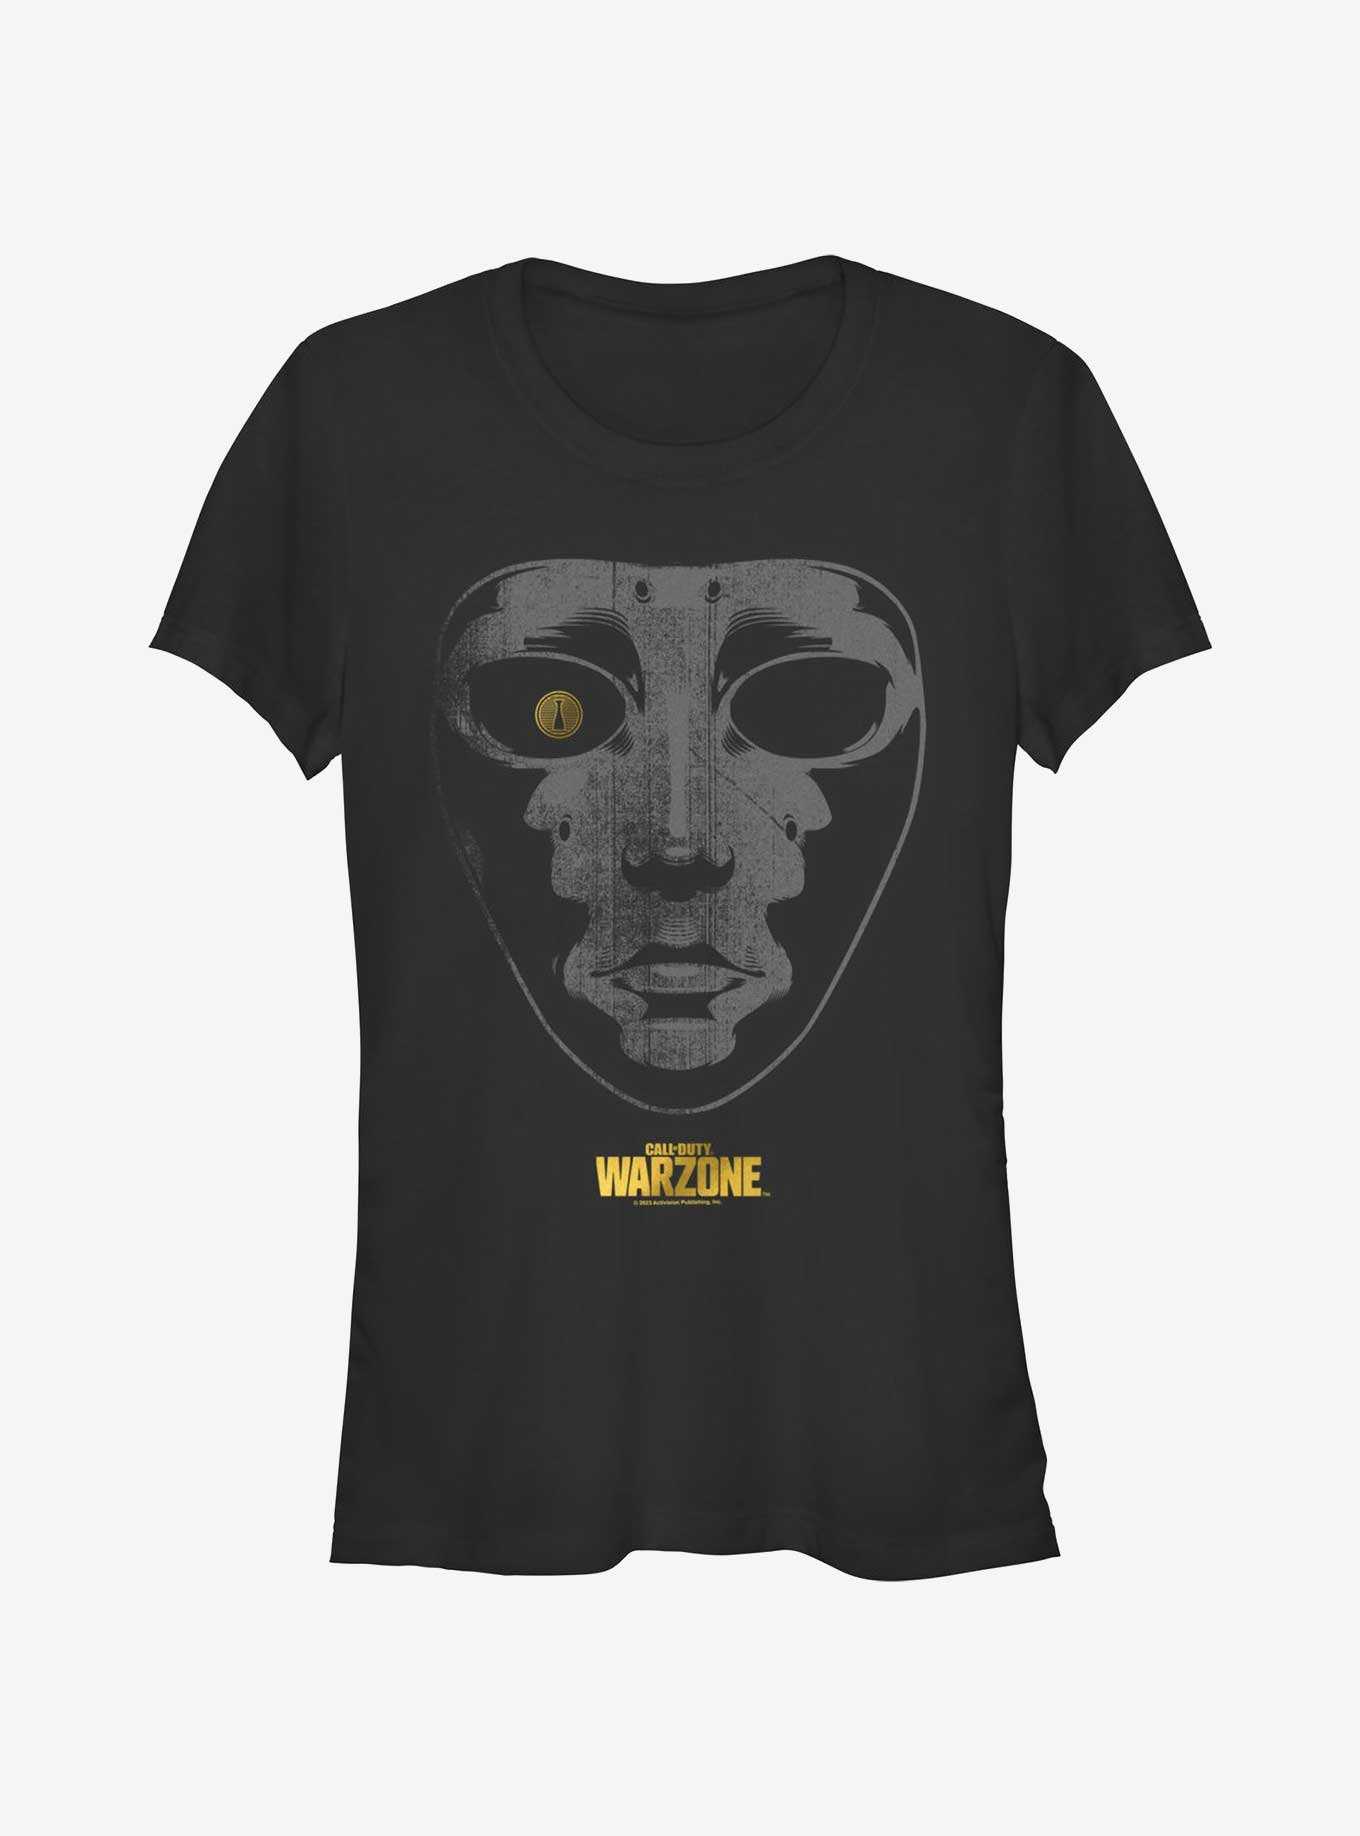 Call of Duty: Warzone Roze Mask Girls T-Shirt, , hi-res